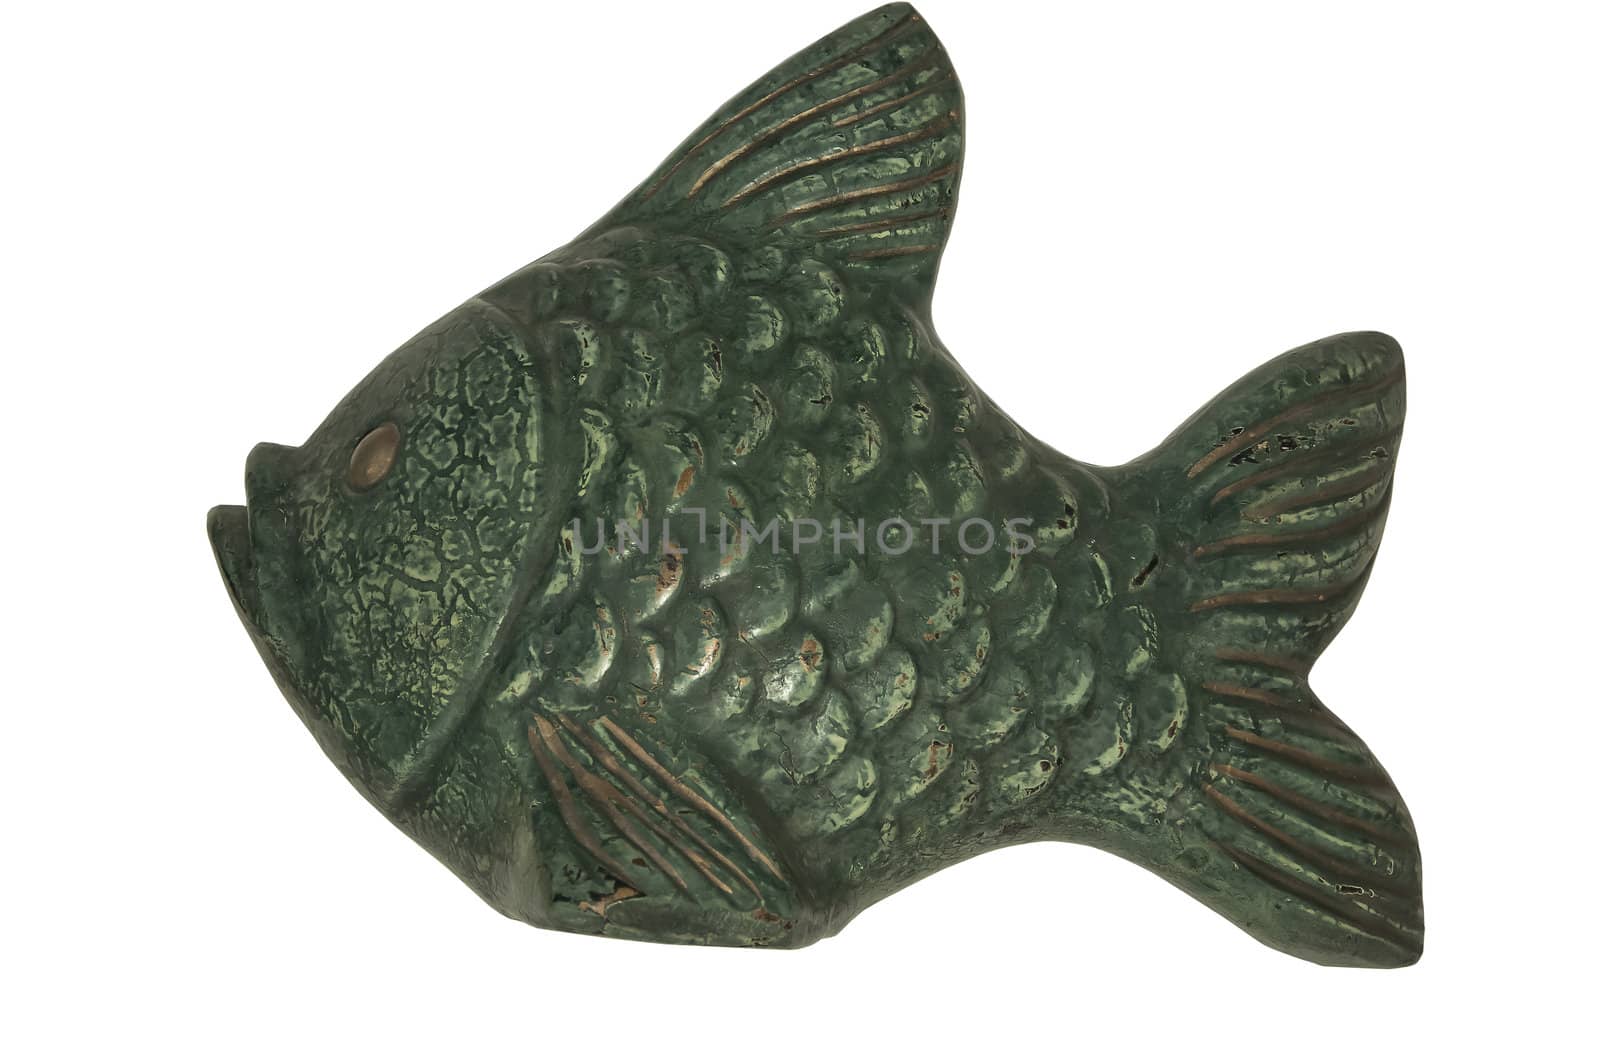 Ceramic sculpture of fish by inxti